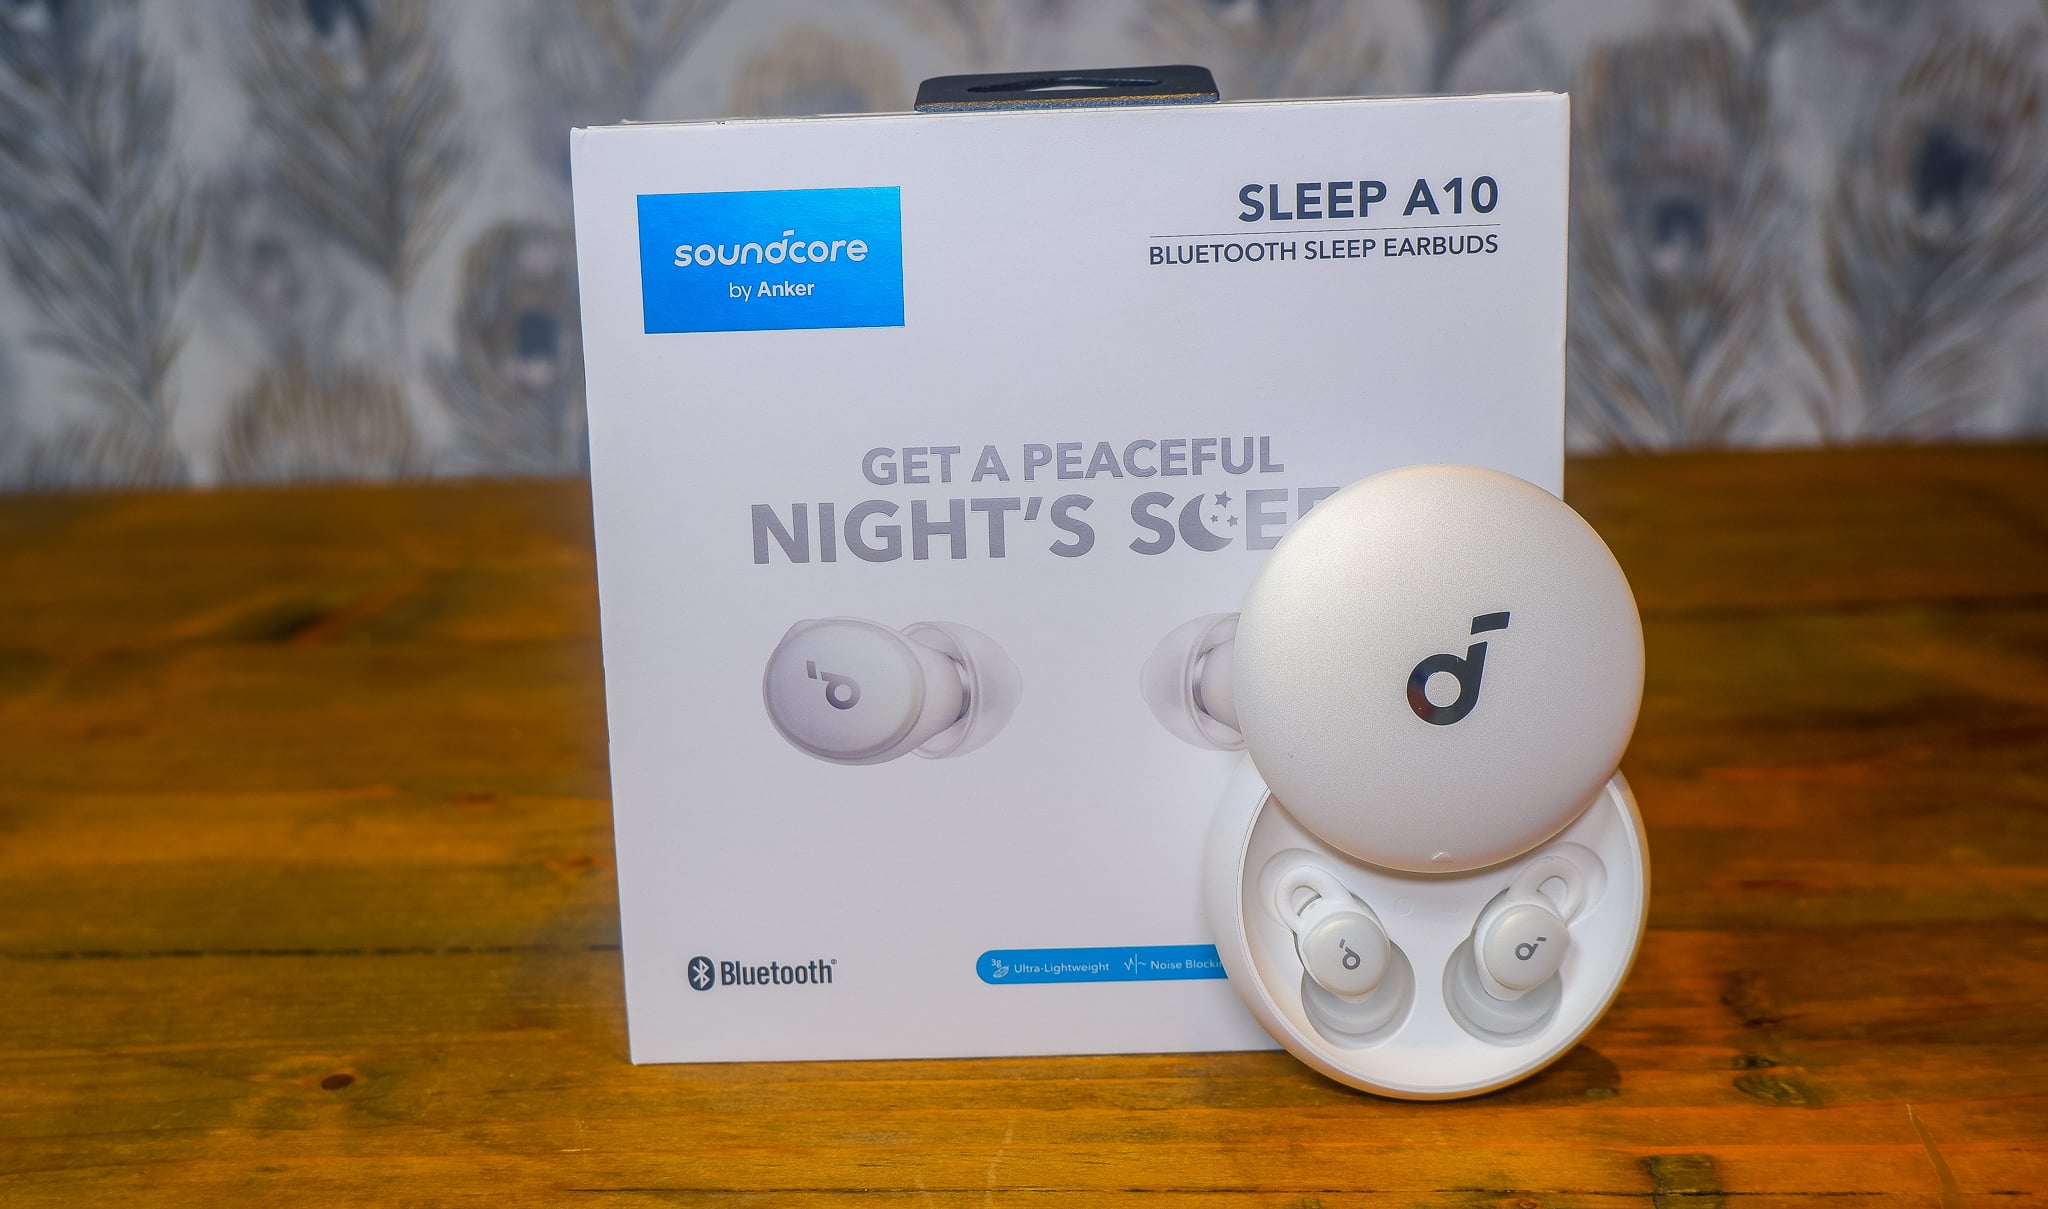 Anker Soundcore Sleep A10 Bluetooth Earbuds Initial Impressions Review – Cheaper & arguably better vs Bose Sleepbuds, Kokoon Nightbuds and QuietOn